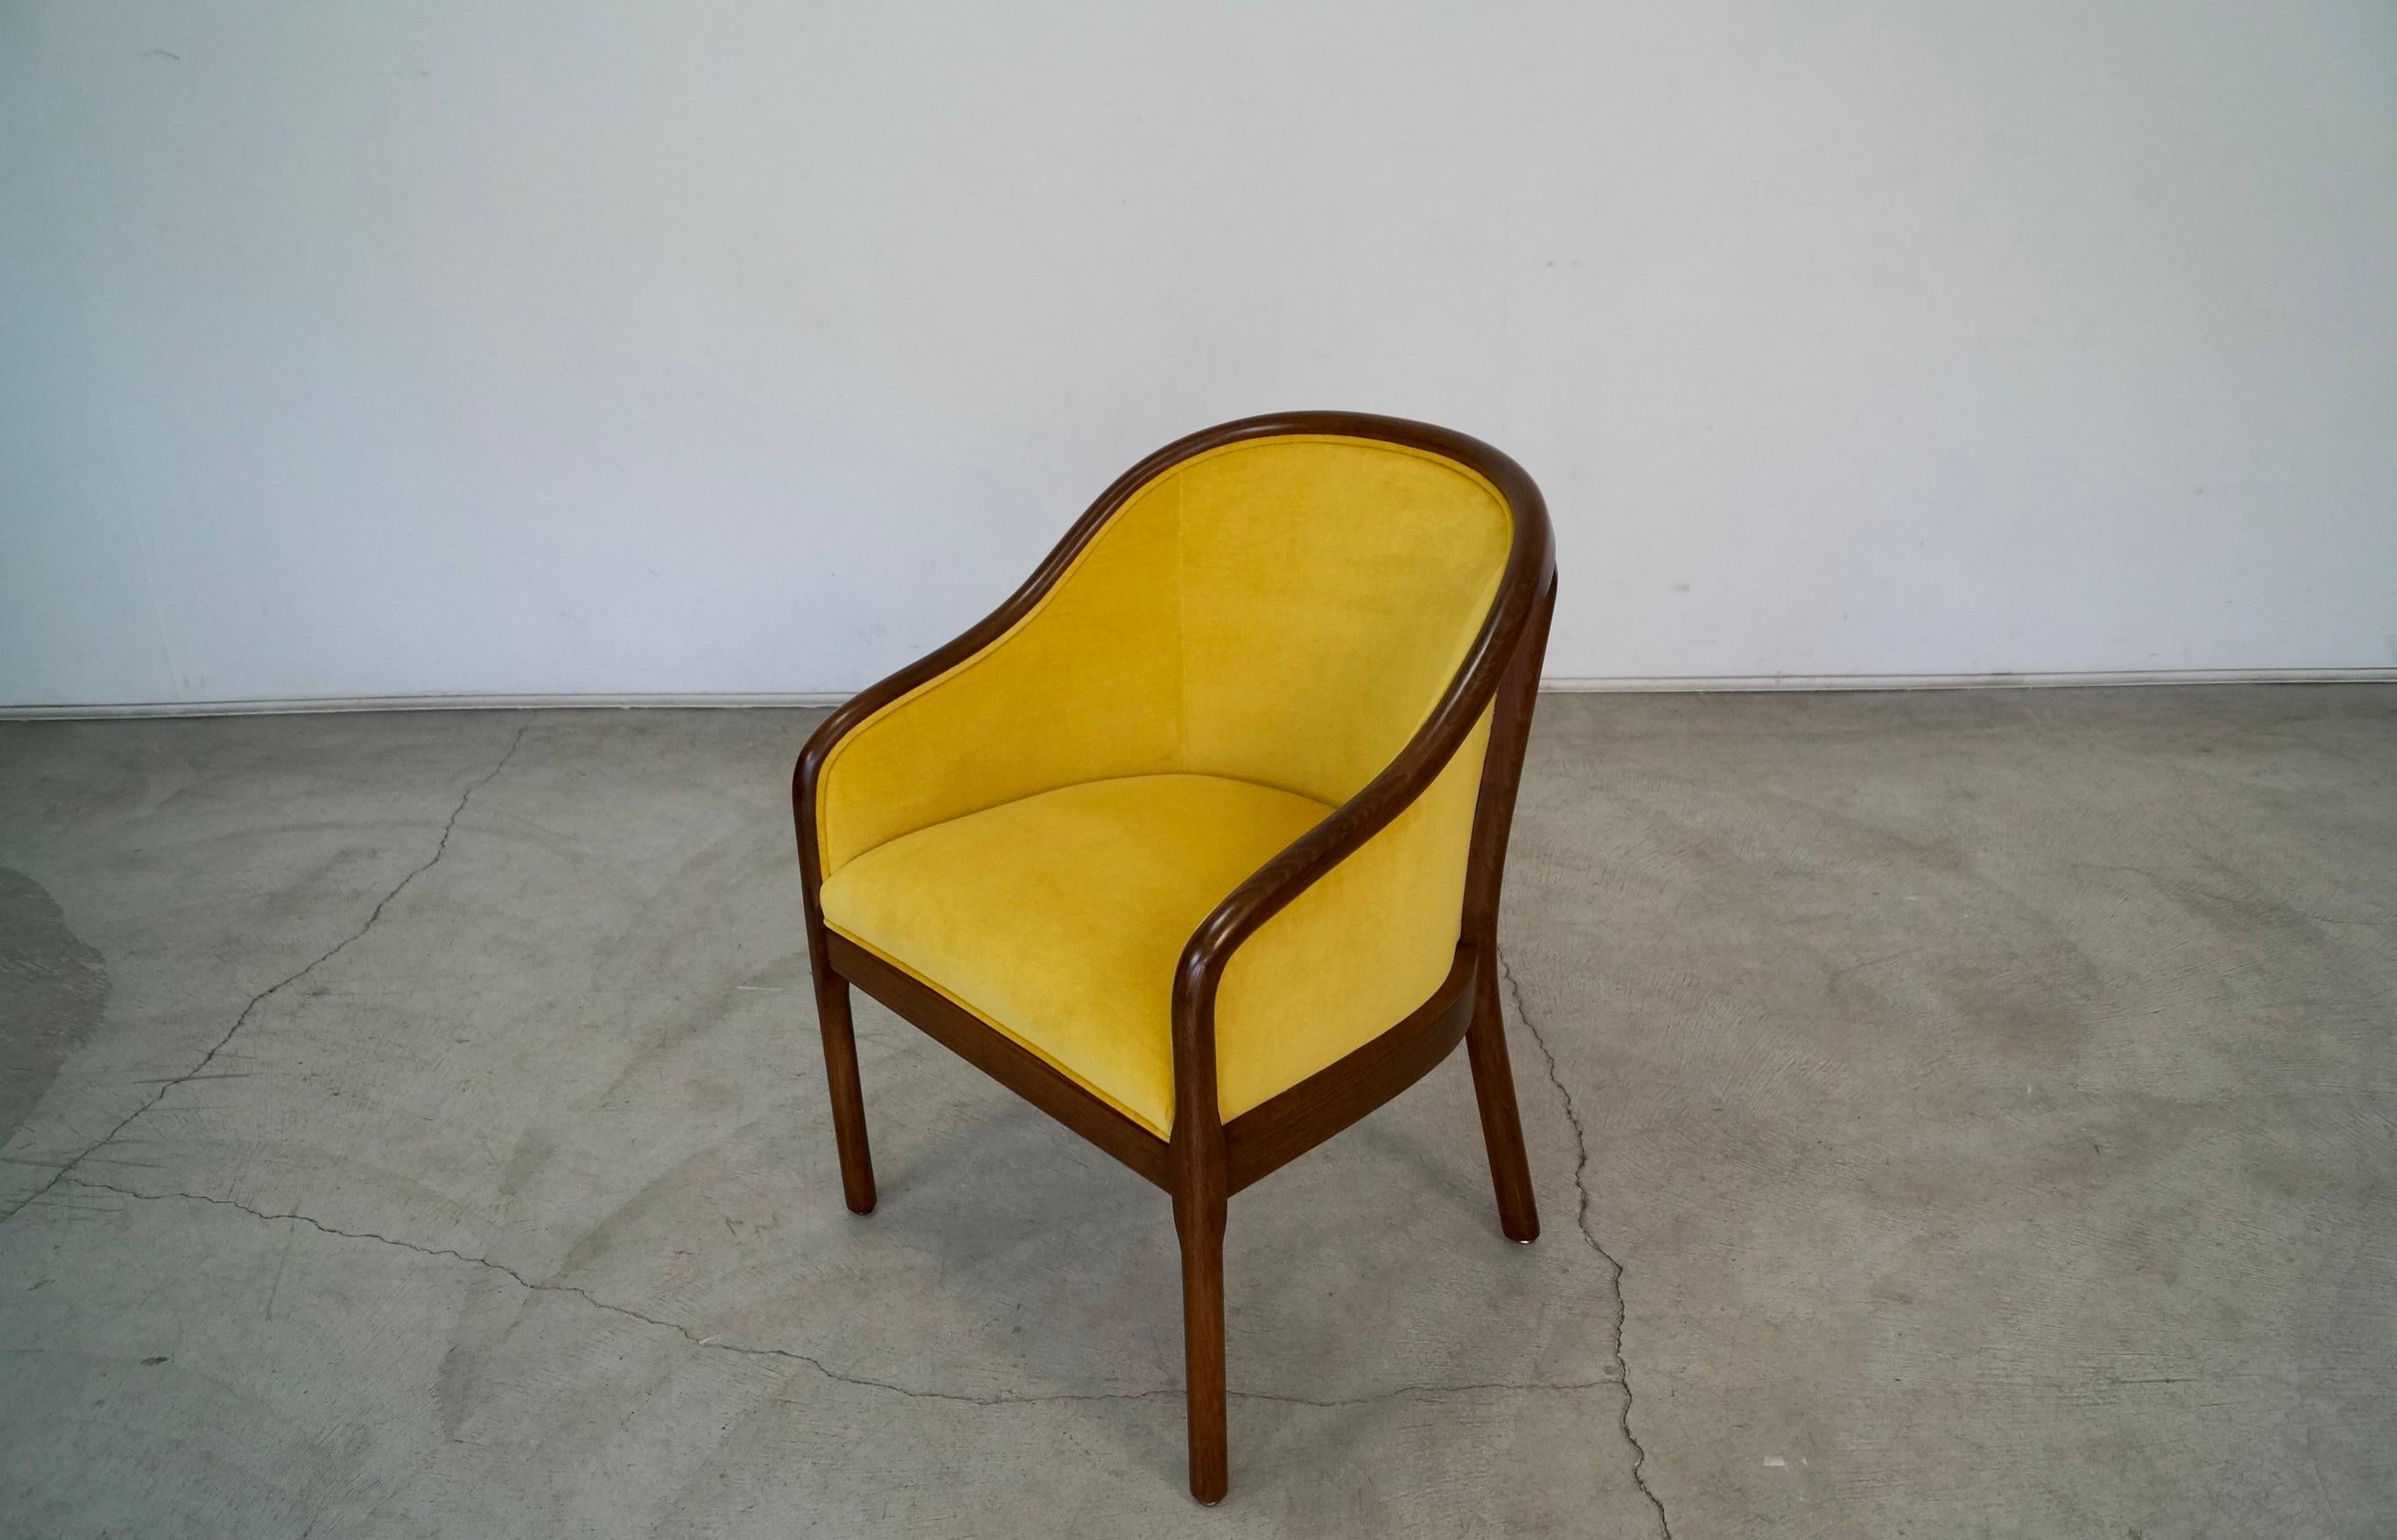 1970s Hollywood Regency Velvet Armchair In Excellent Condition For Sale In Burbank, CA